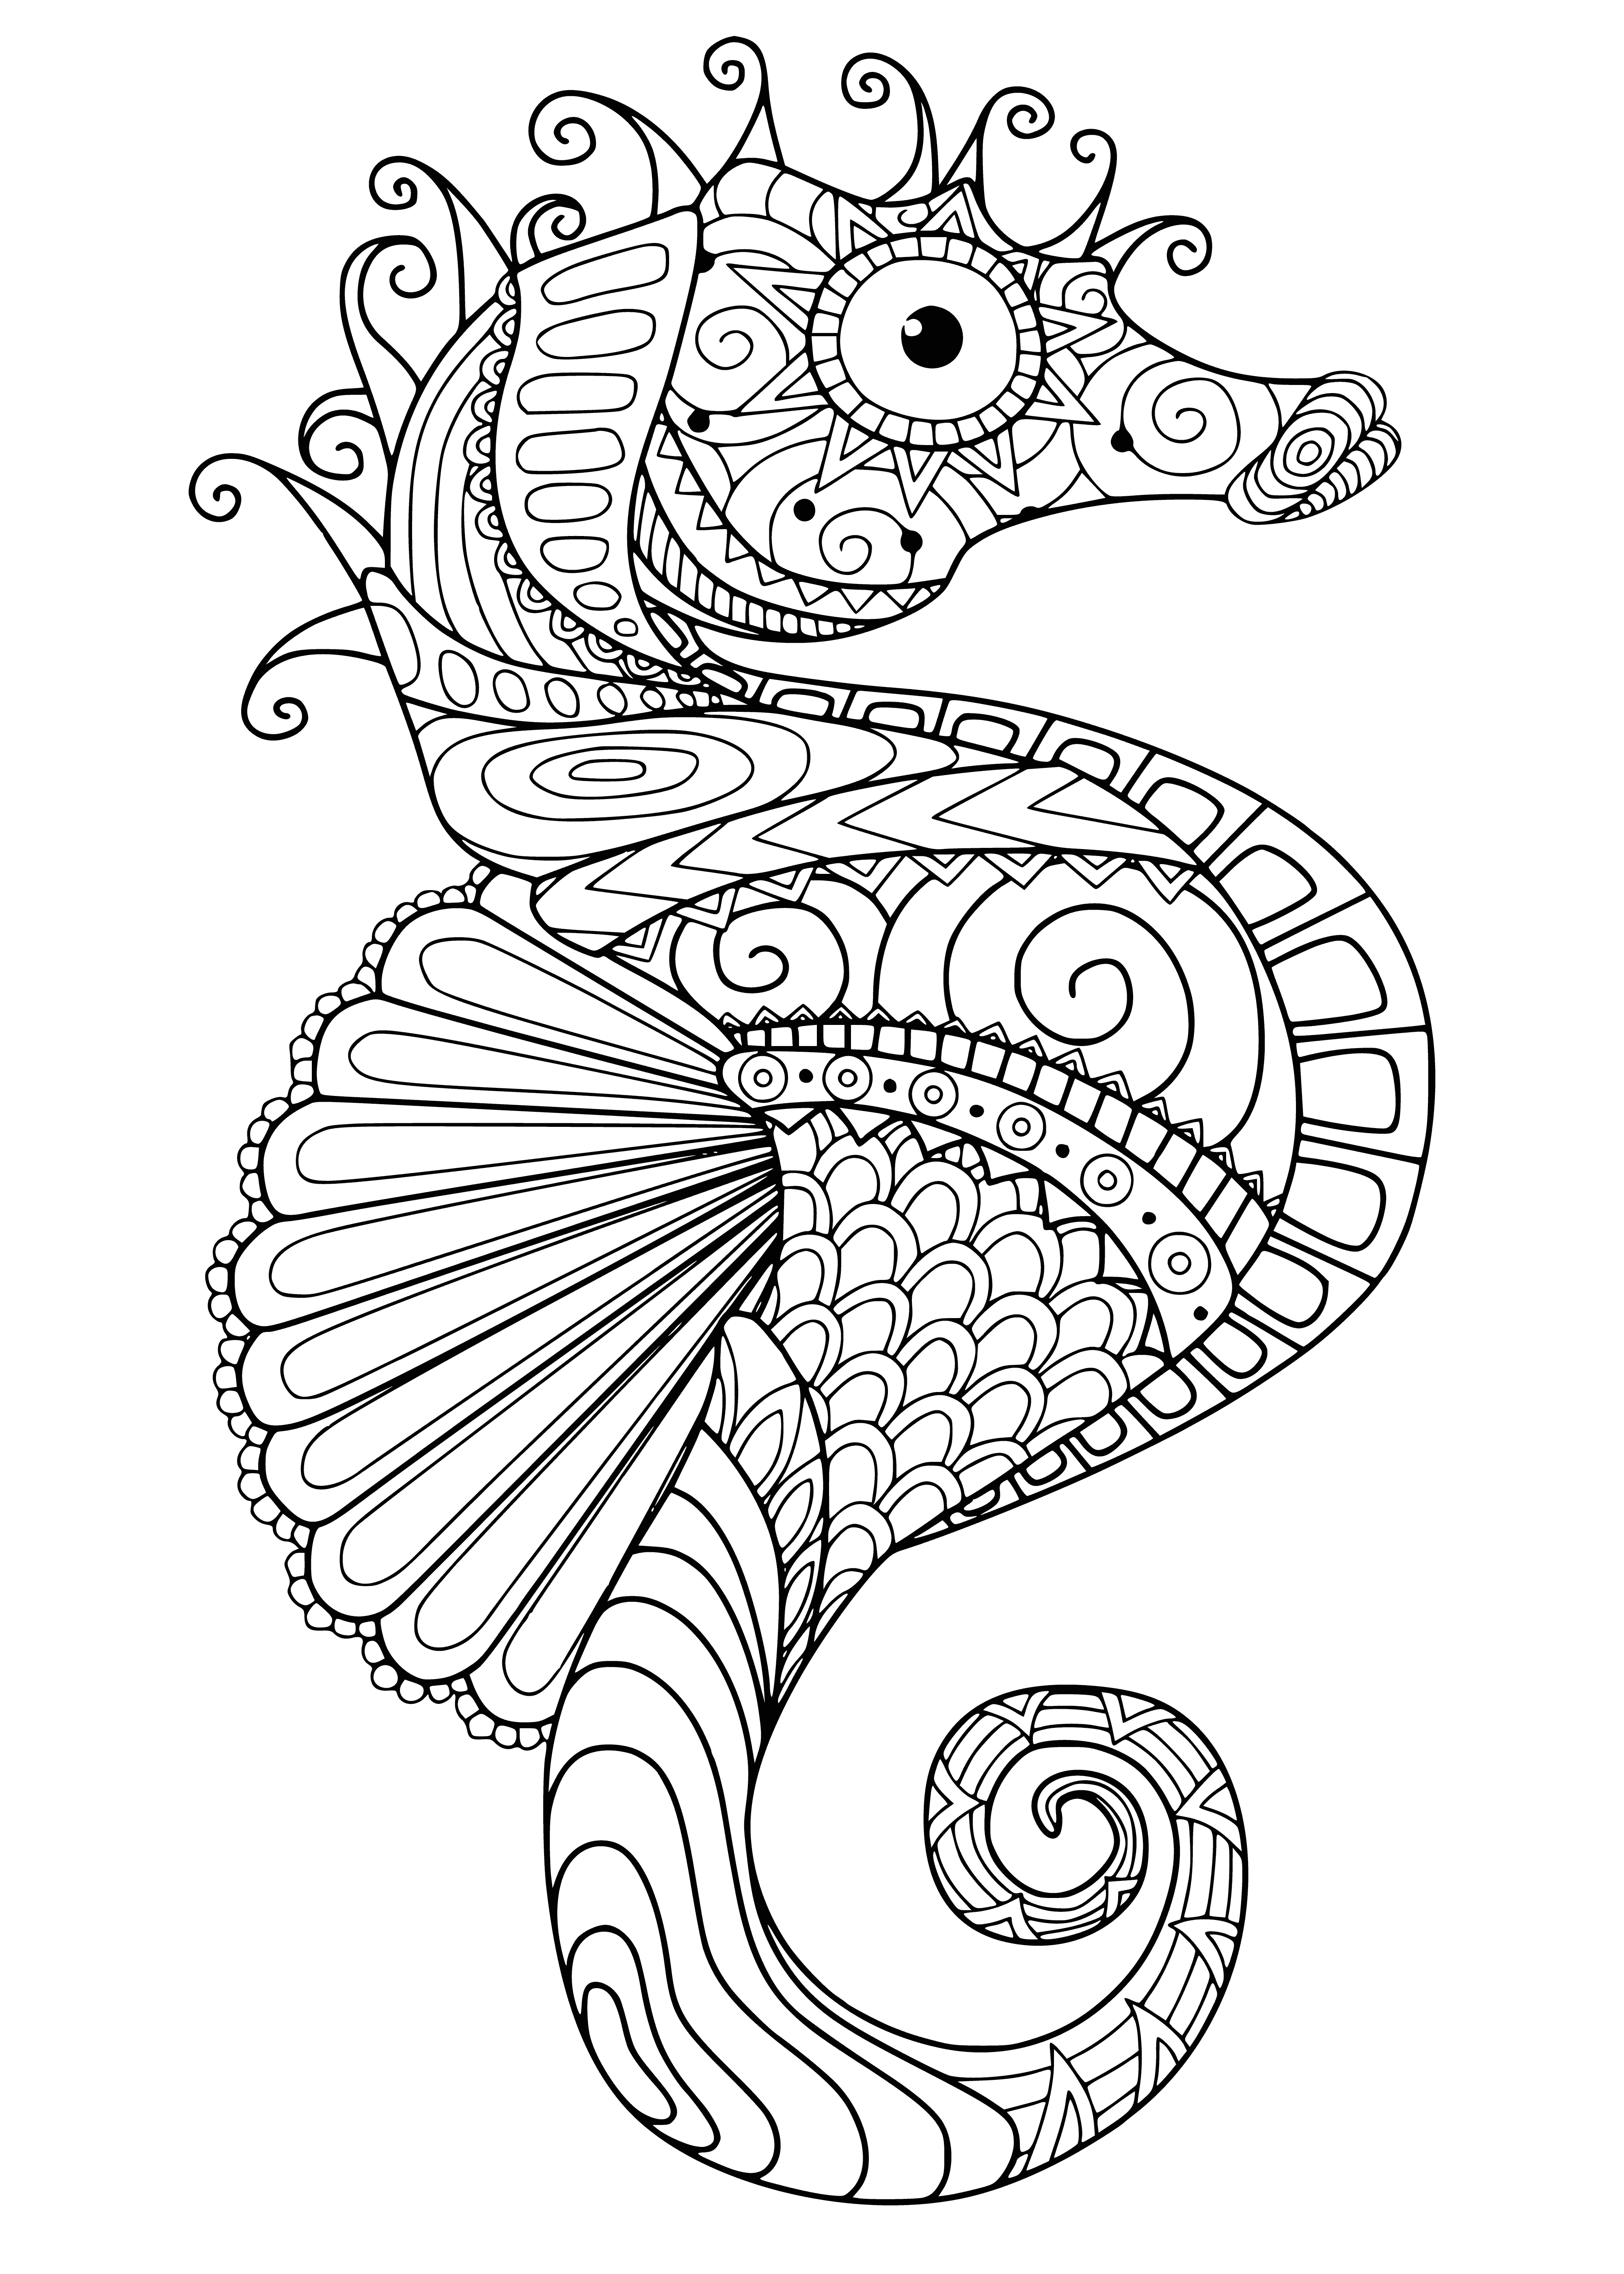 coloring page: The sea horse swims peacefully in a calming ocean, its body covered in colorful scales and its snout and tail long. A beautiful creature at peace with its environment.